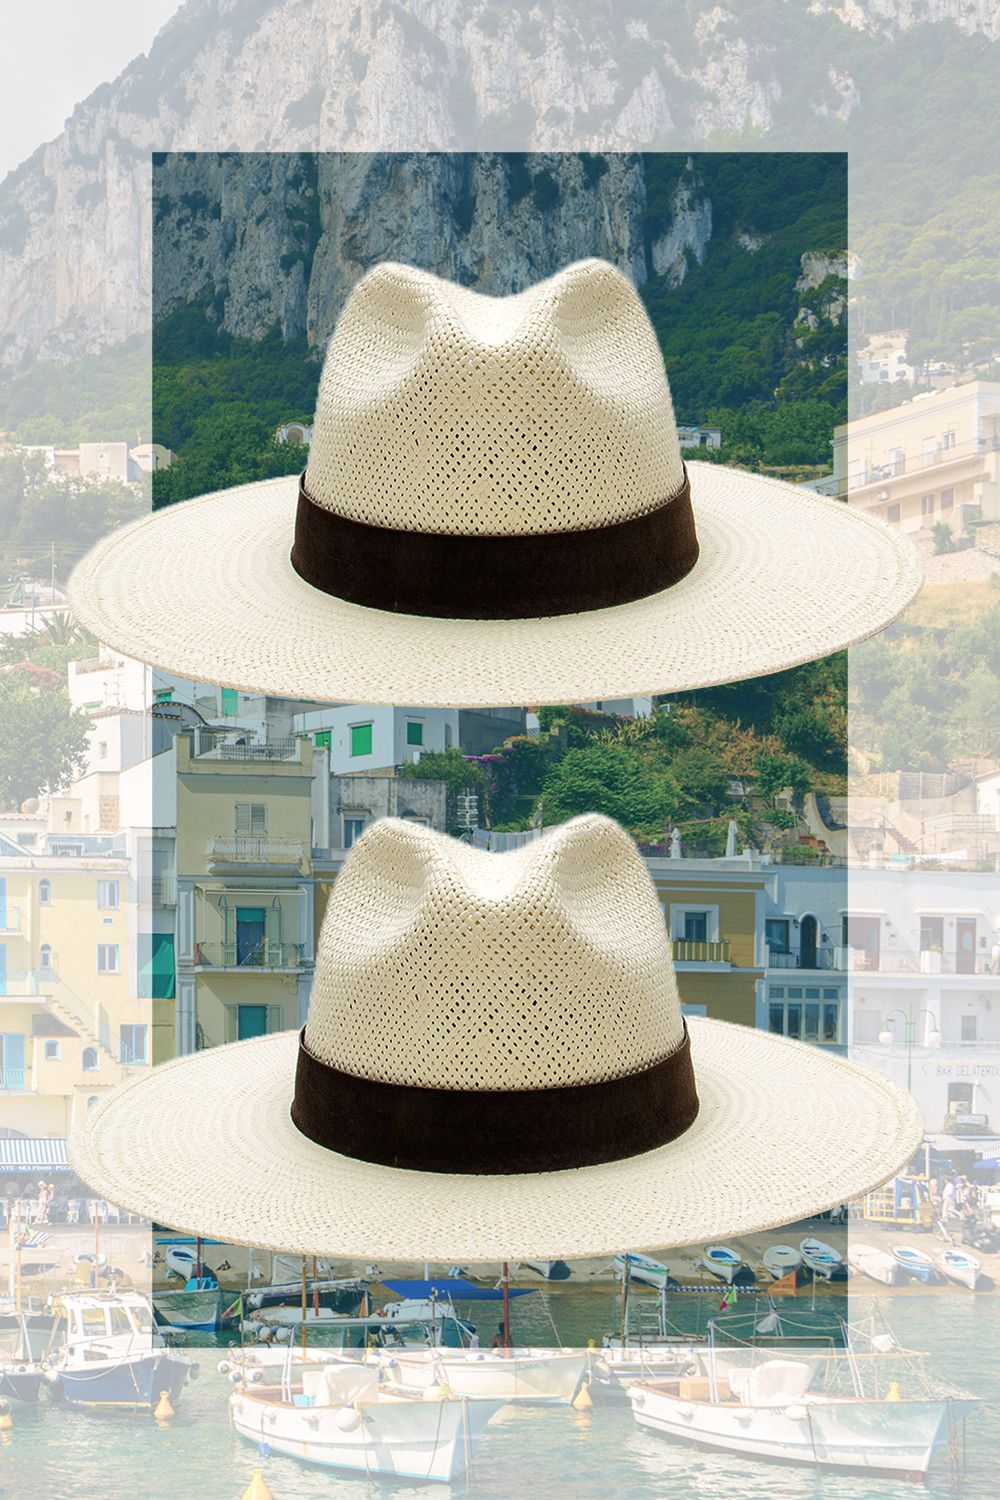 What to Pack For Capri - How to Pack for a Trip to Capri Italy